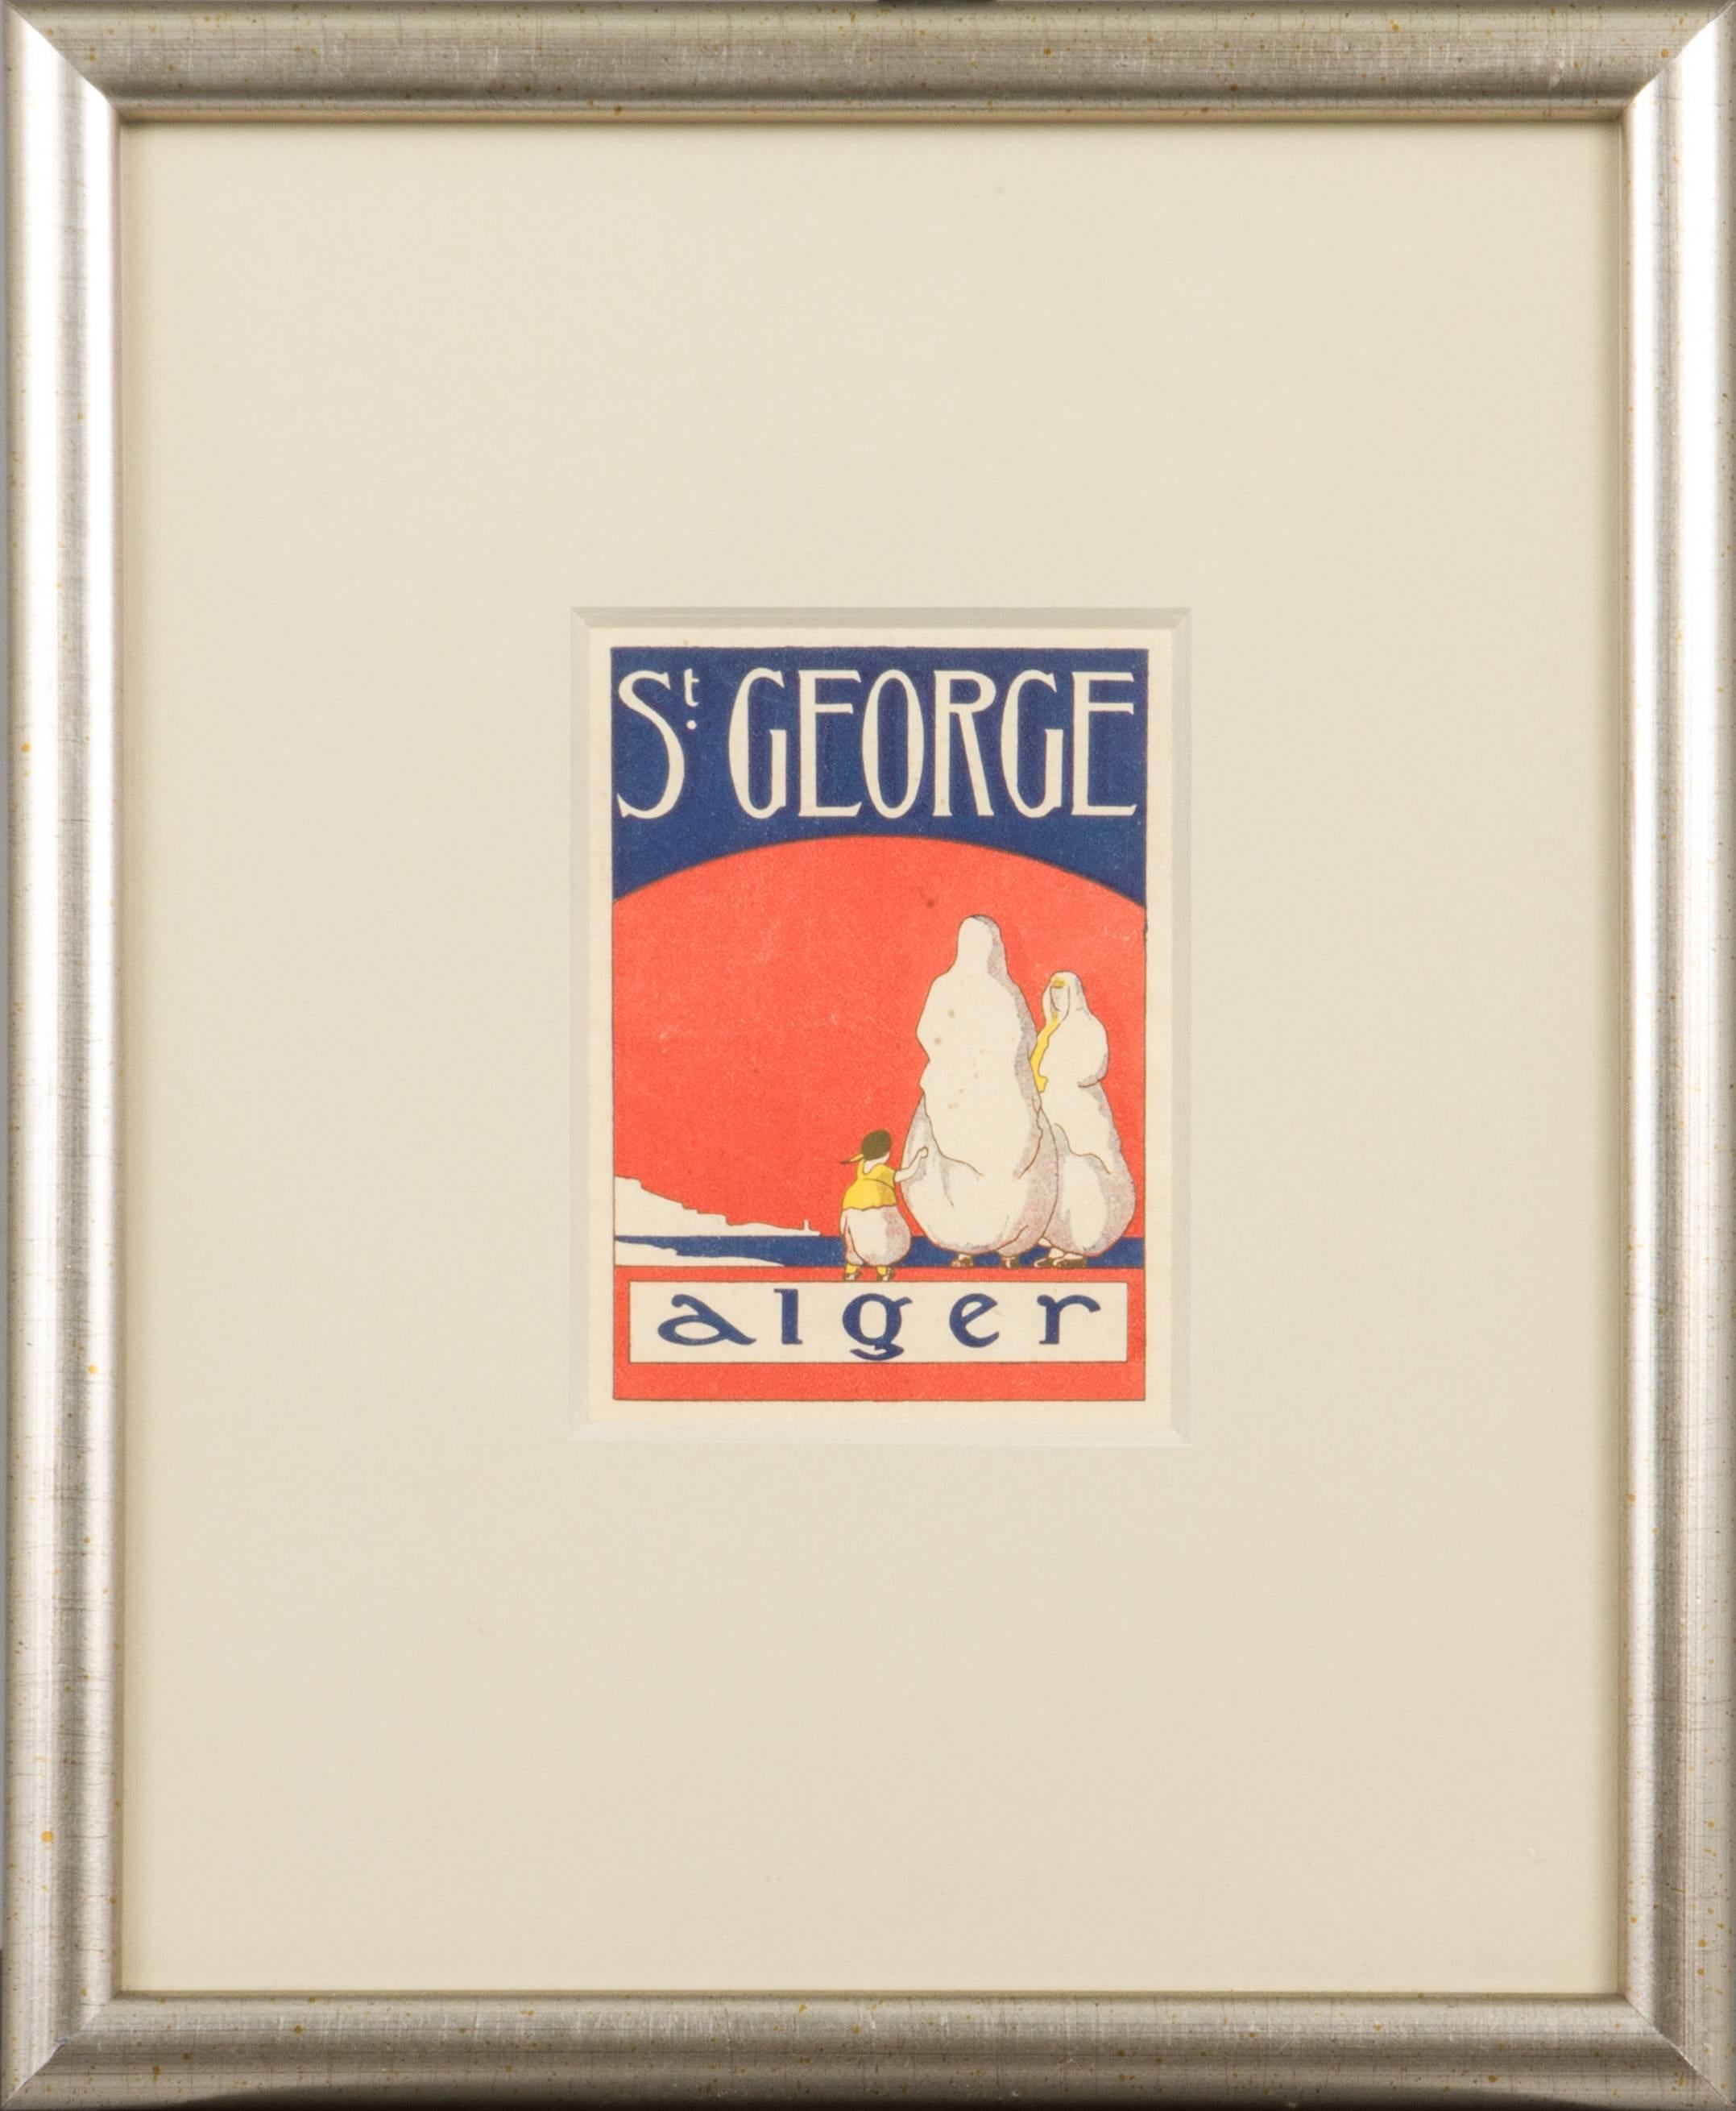 This is a small travel poster that would originally be placed on luggage. It is from the famous luxury hotel, the St. George. The image measures 3